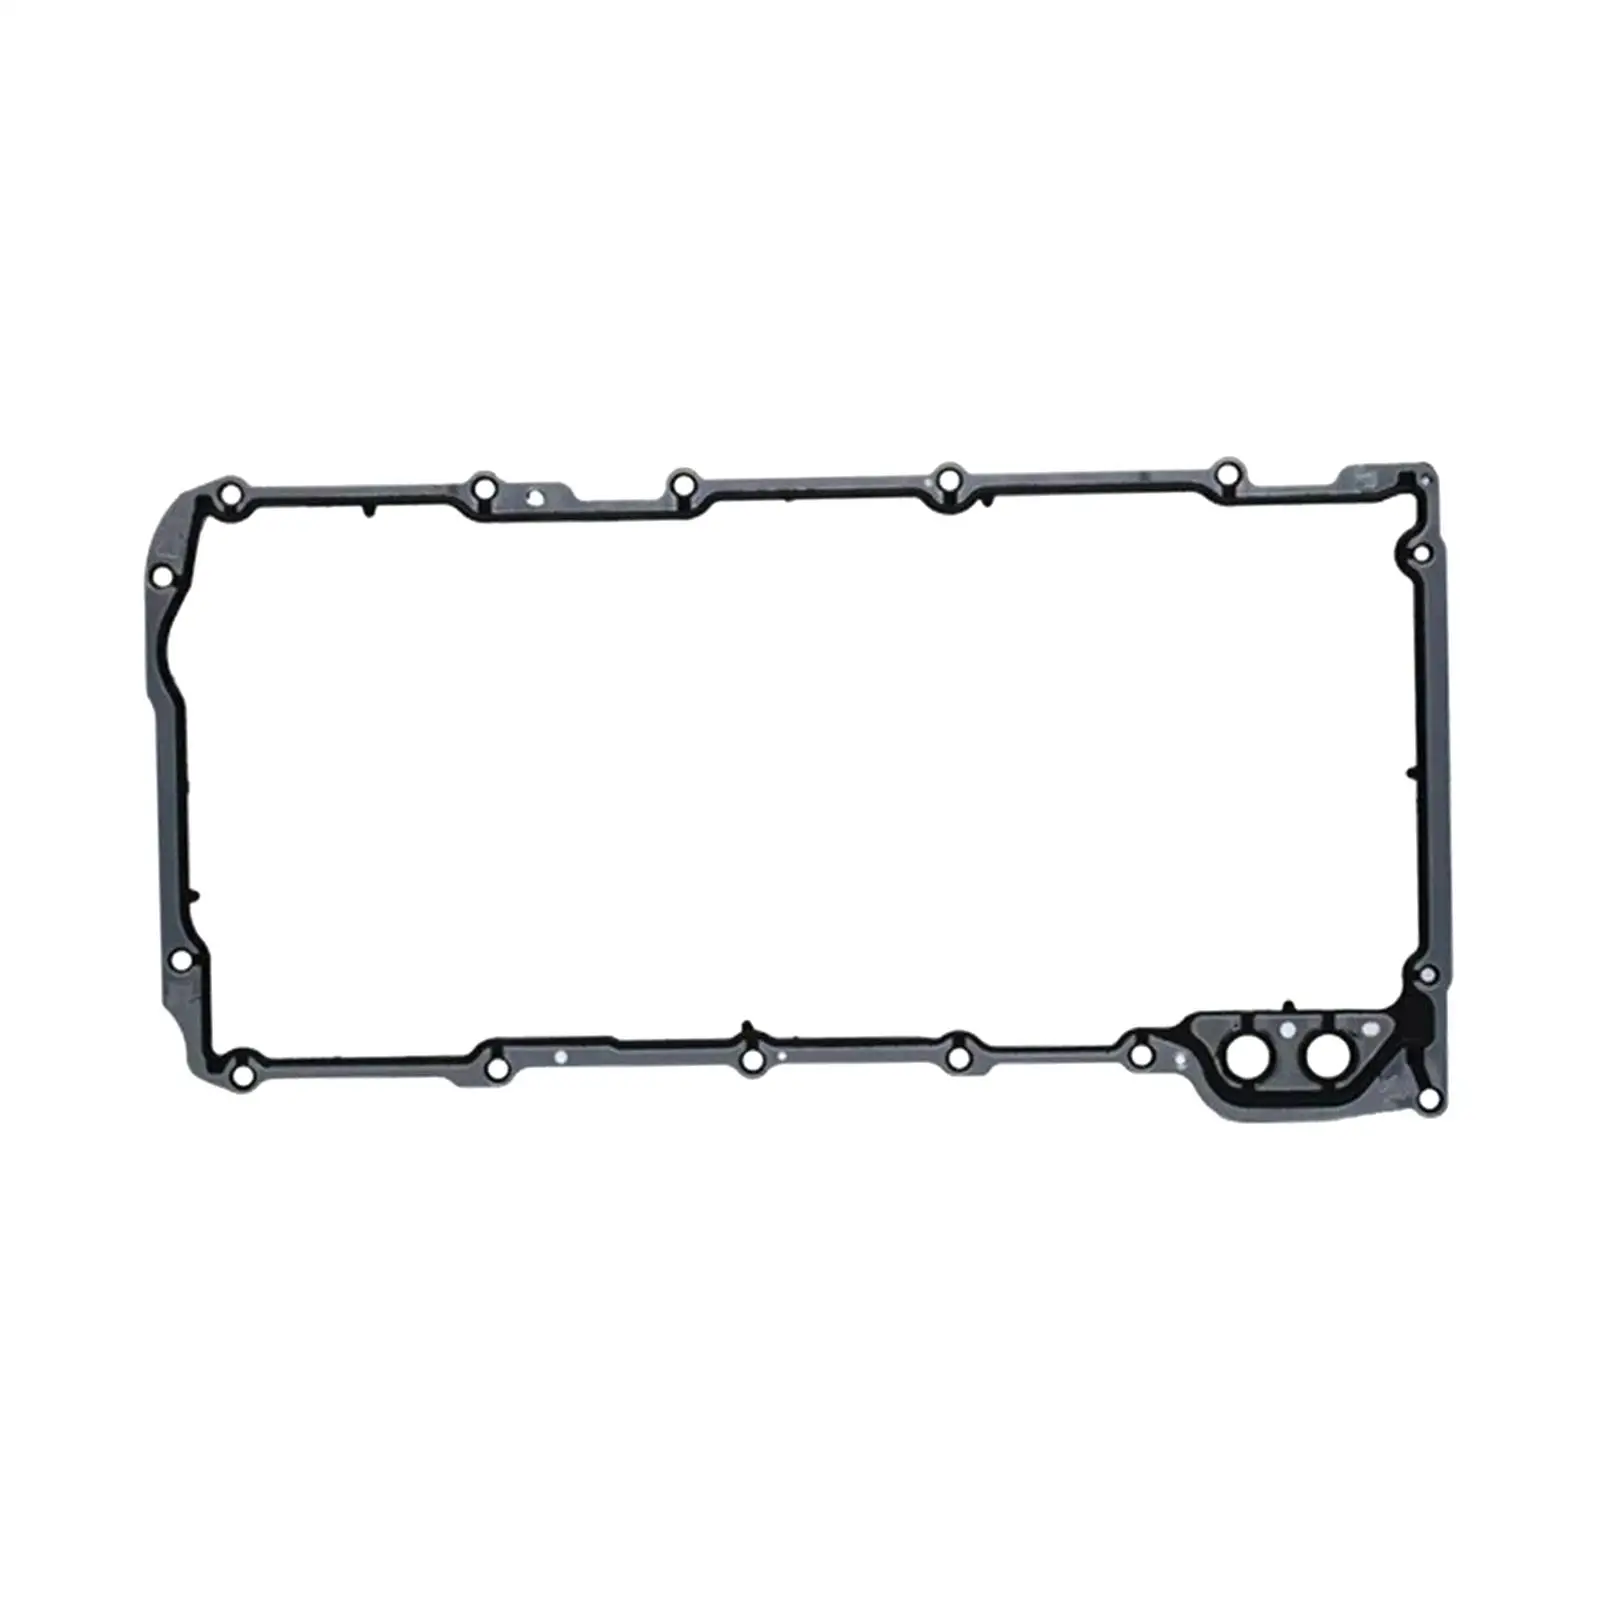 Engine Oil Pan Gasket OS30693R for Hummer Replaces Car Accessories